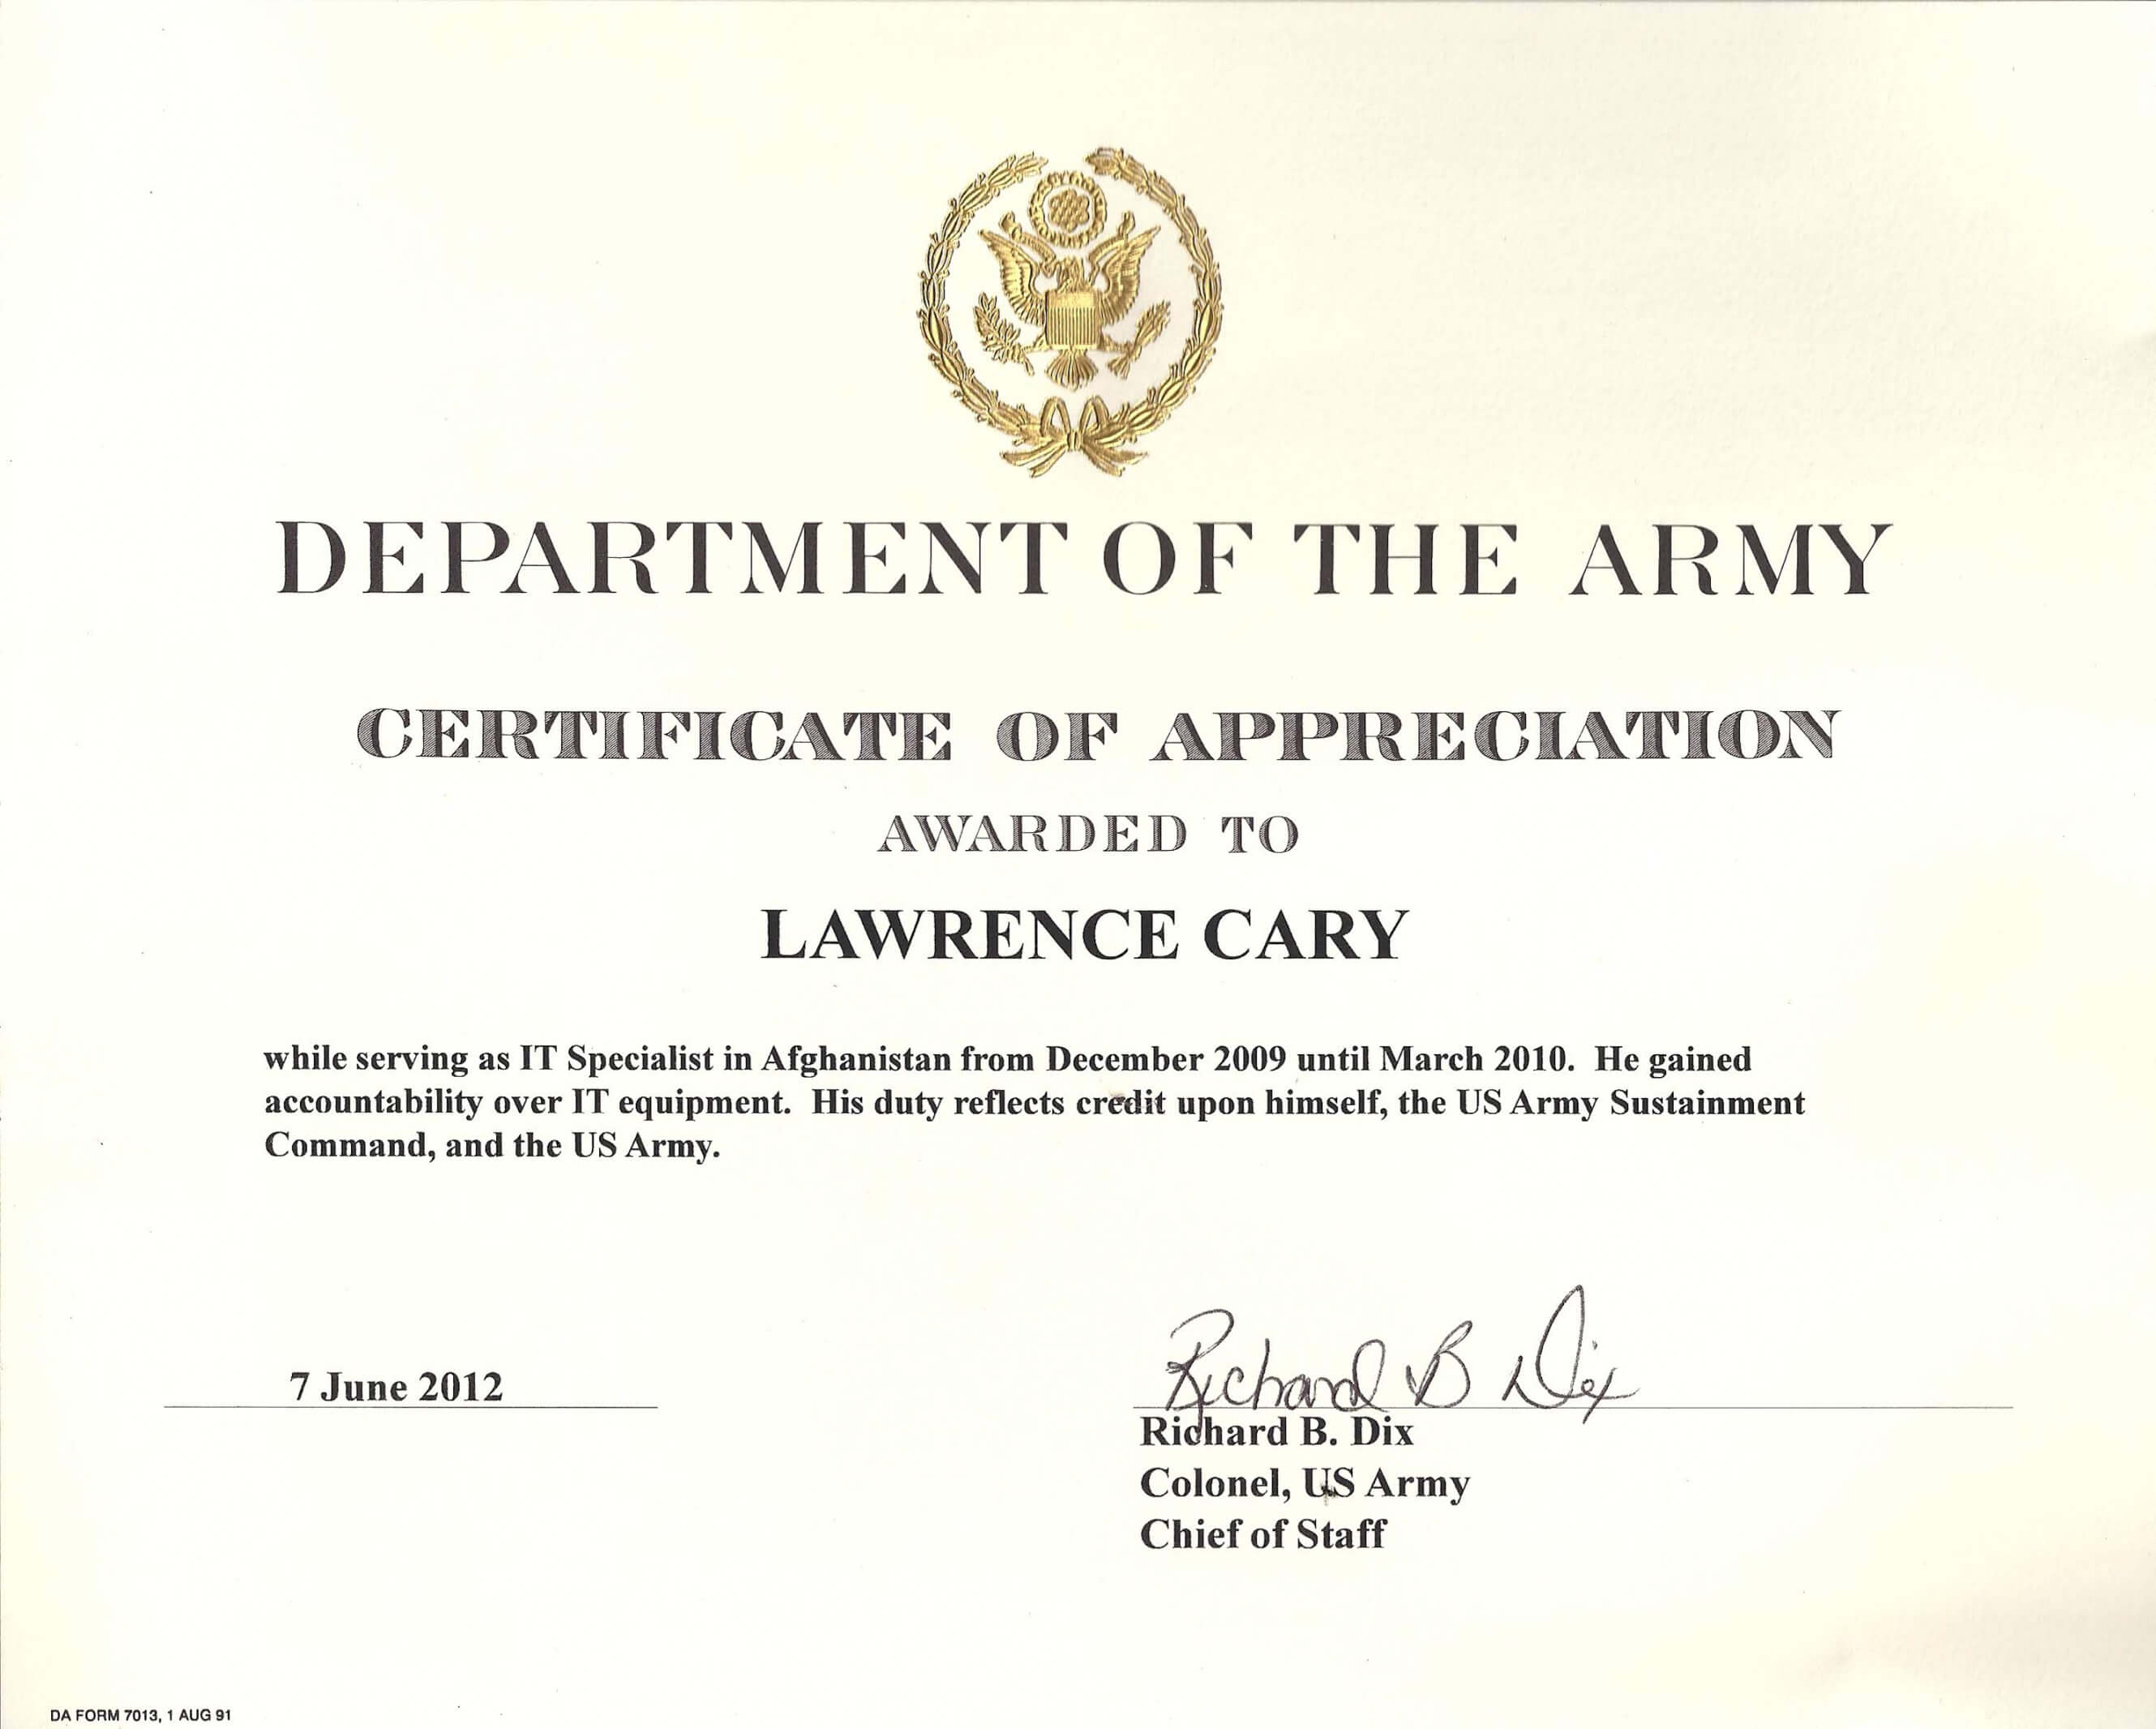 Army Promotion Certificate Template | Emetonlineblog Within Promotion Certificate Template